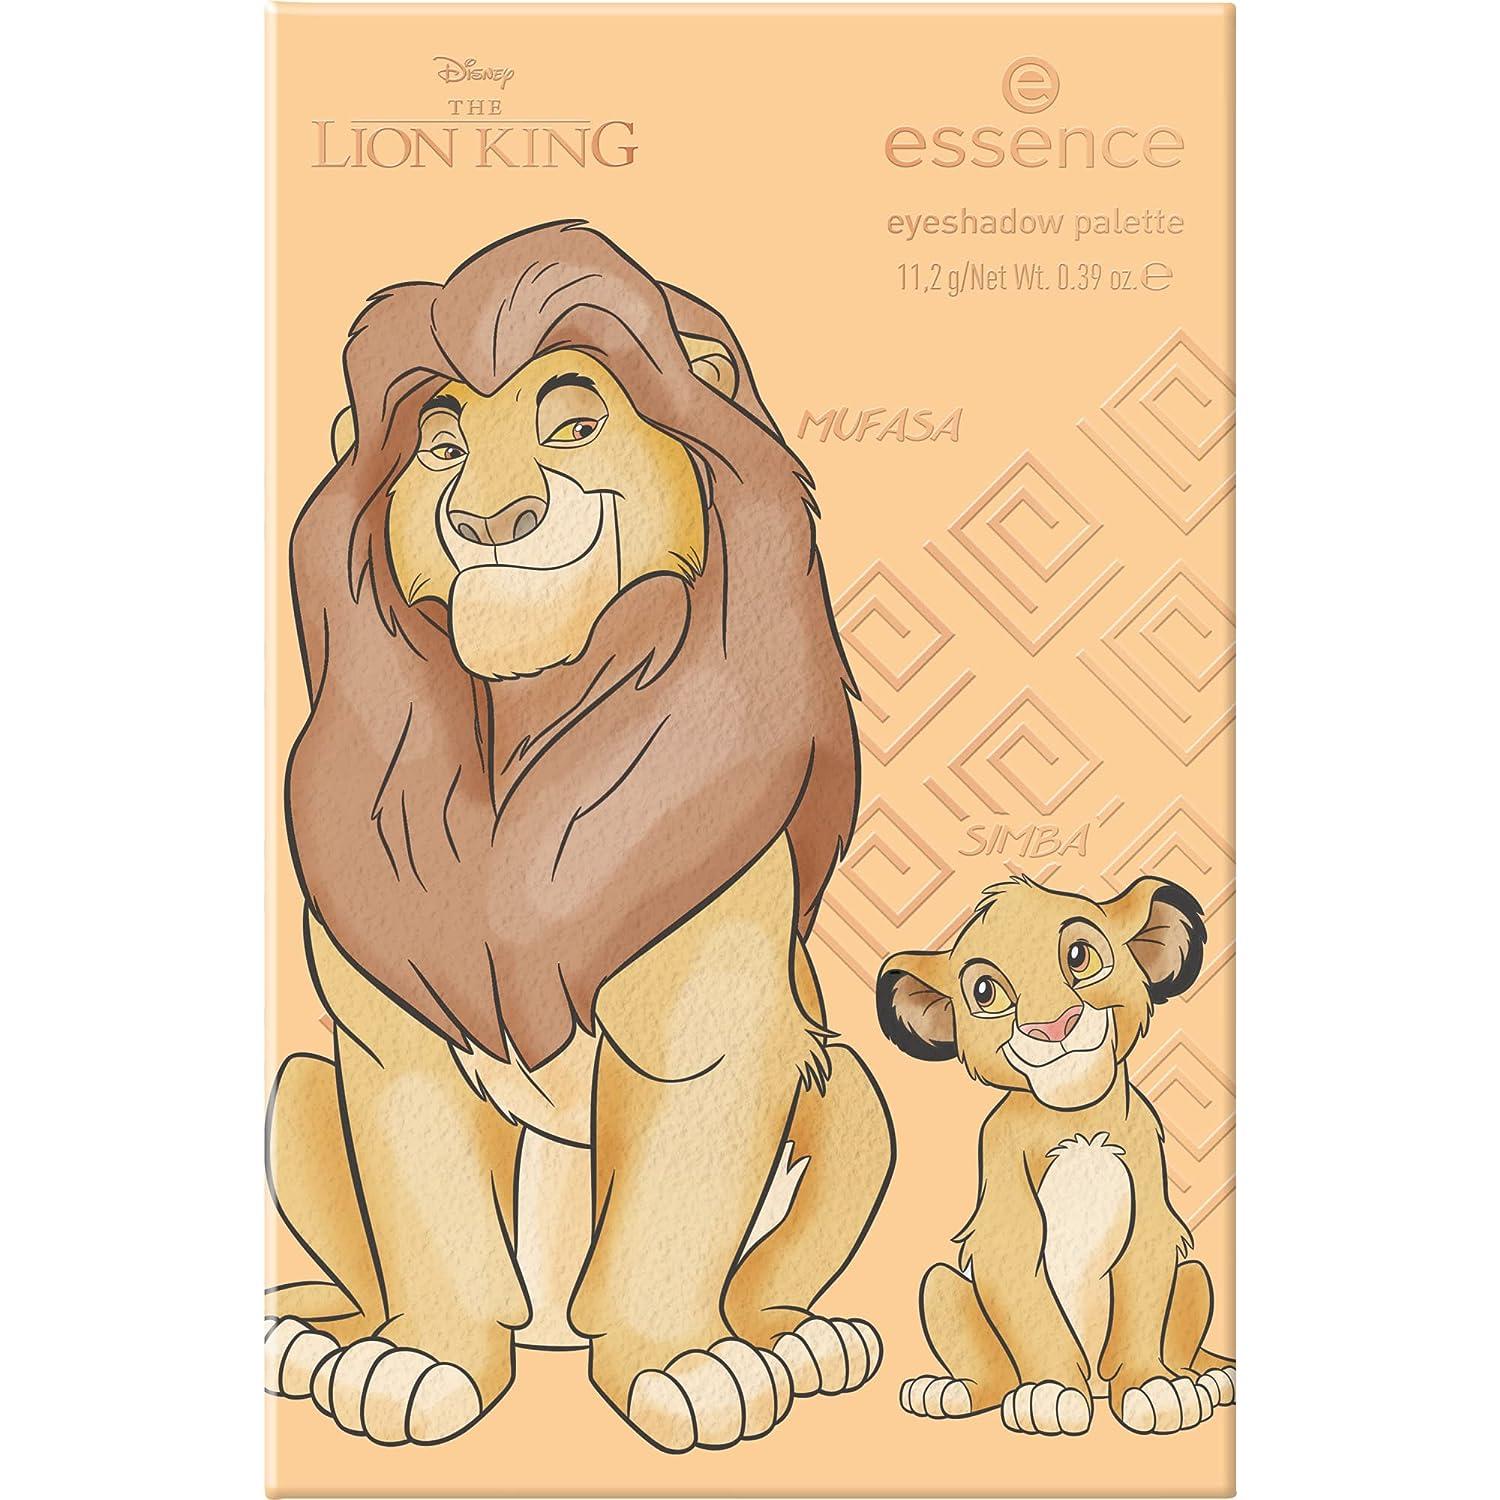 essence | | | Metallic Cruelty Palette 14 Collection Disney King Lion Easy & | & Pigmented Paraben Shadows Highly Oil to | Free Matte The Vegan Eyeshadow | Edition Limited Blend